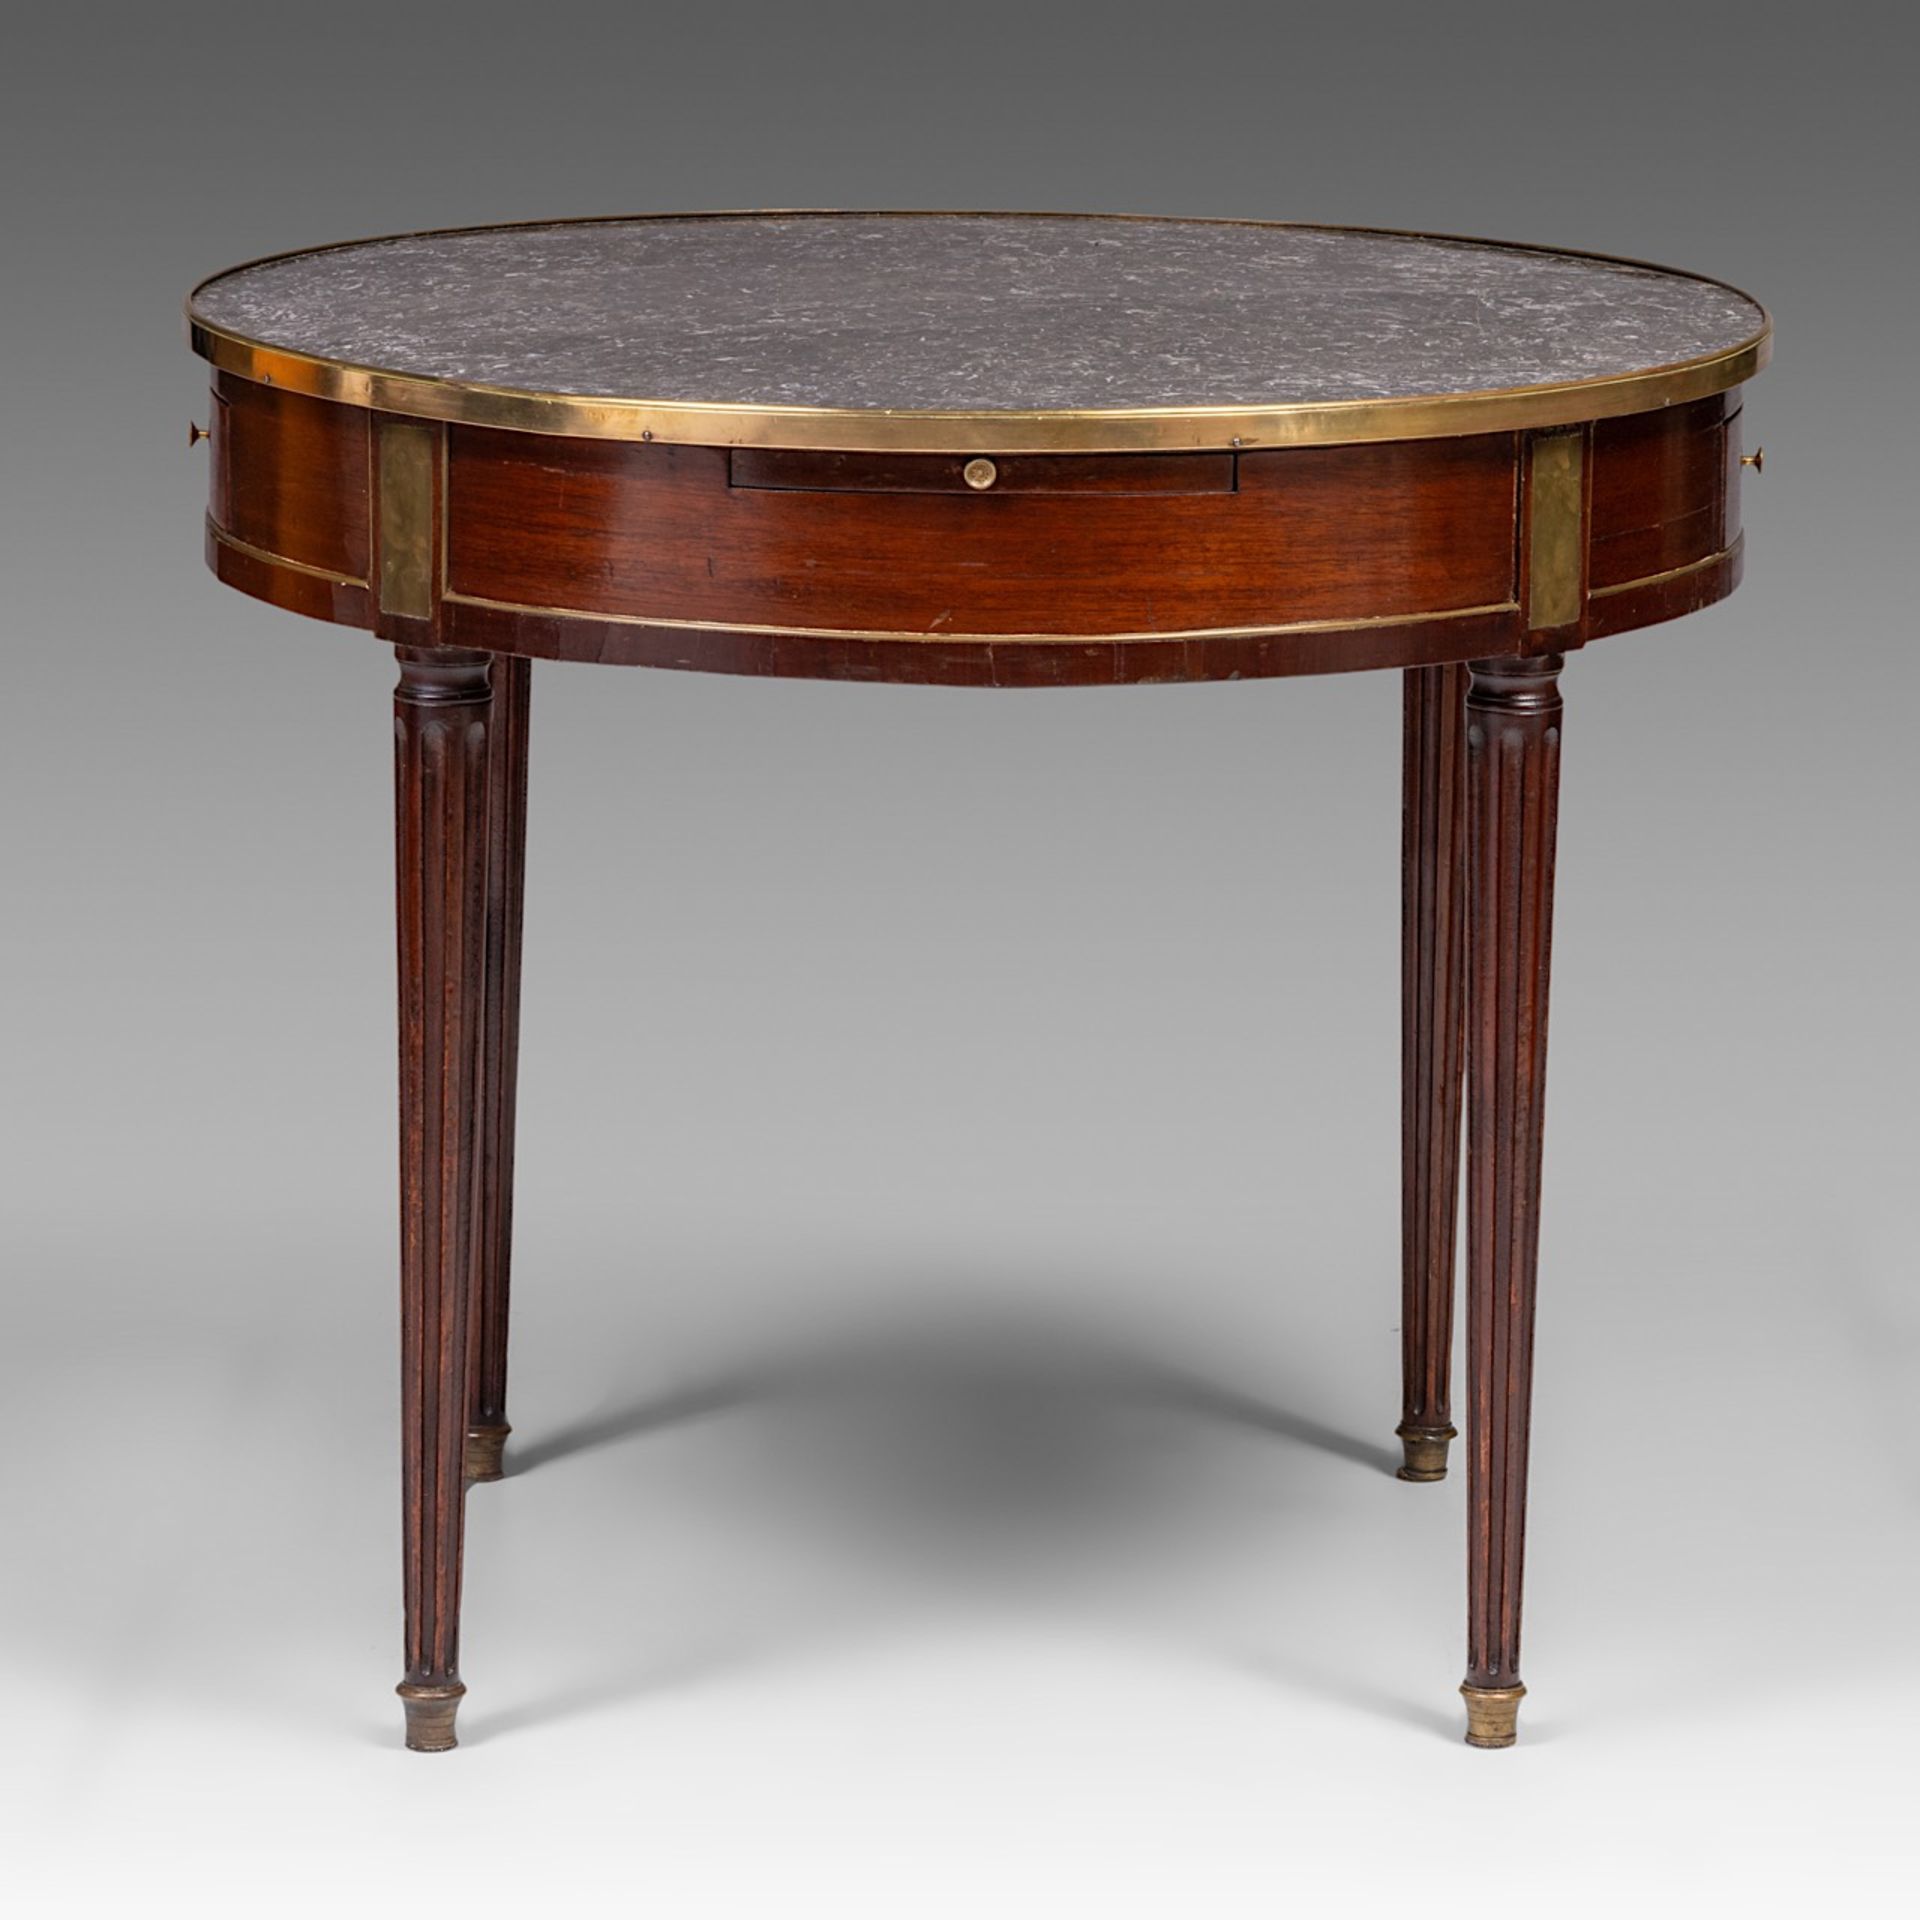 A Louis XVI bouillotte table with a marble top and gilded bronze mounts, H 73 - dia 85 cm - Image 5 of 8